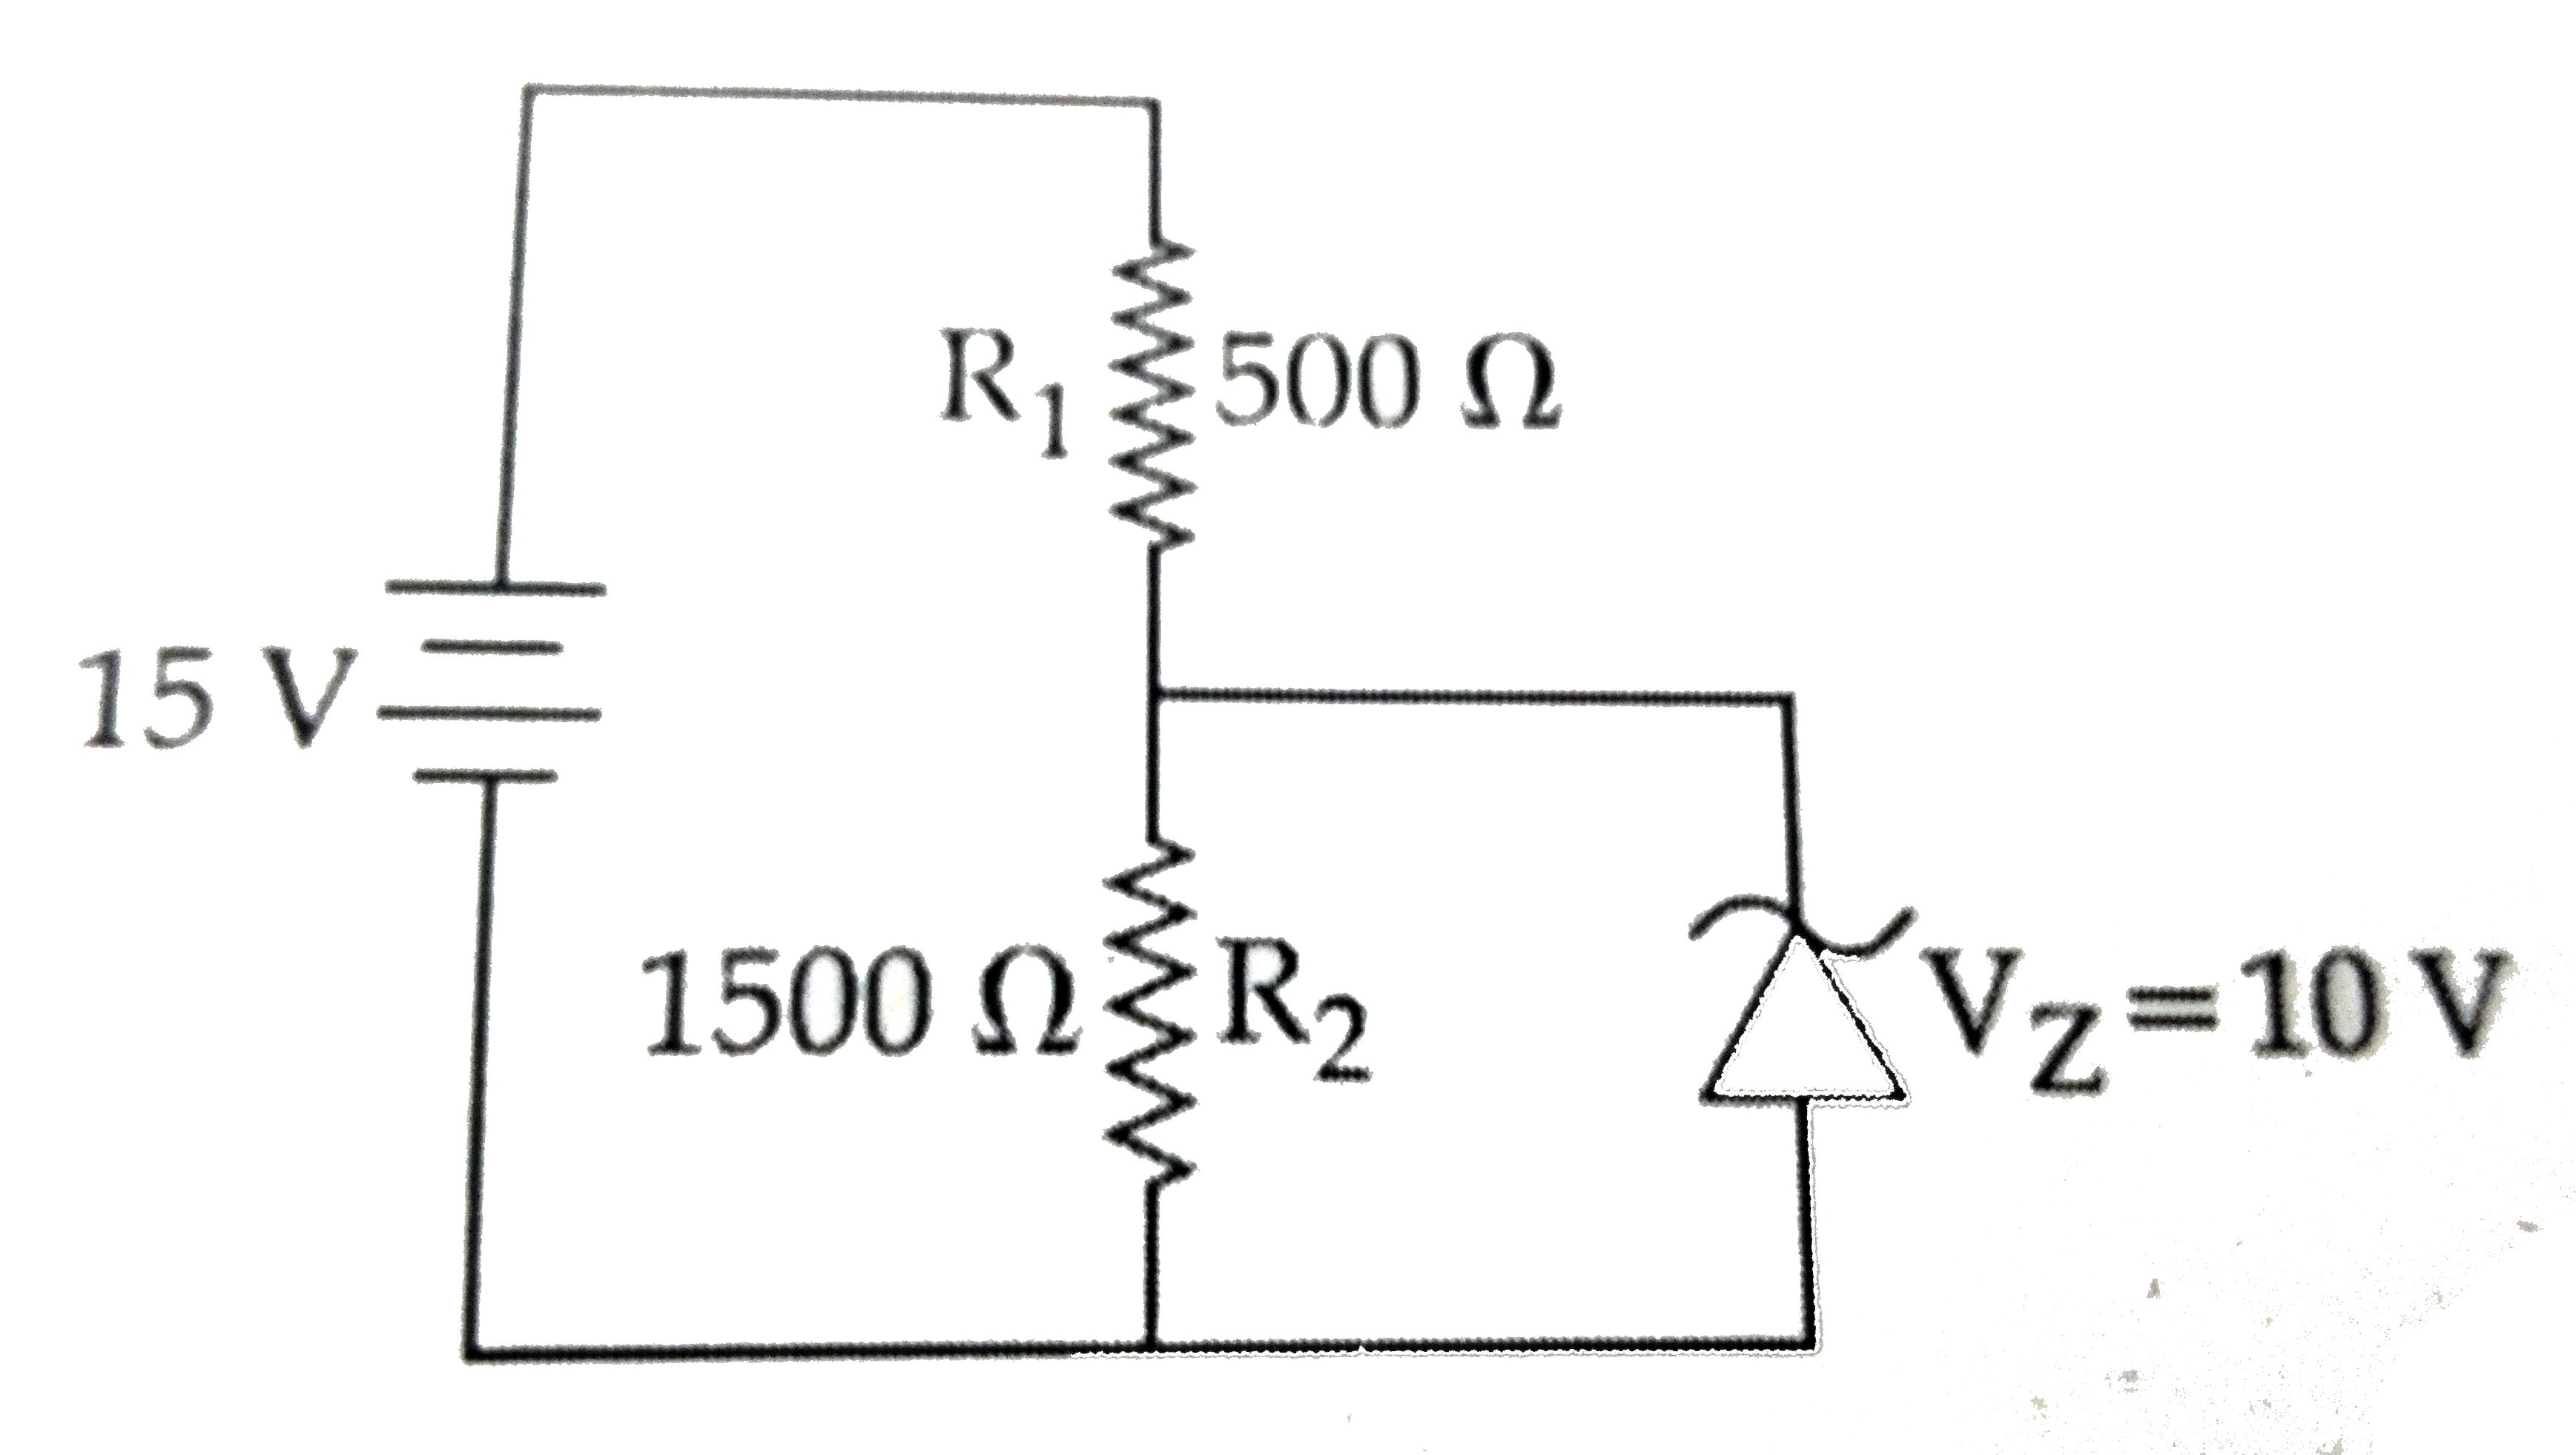 In the given circuit, the current through zener diode is :